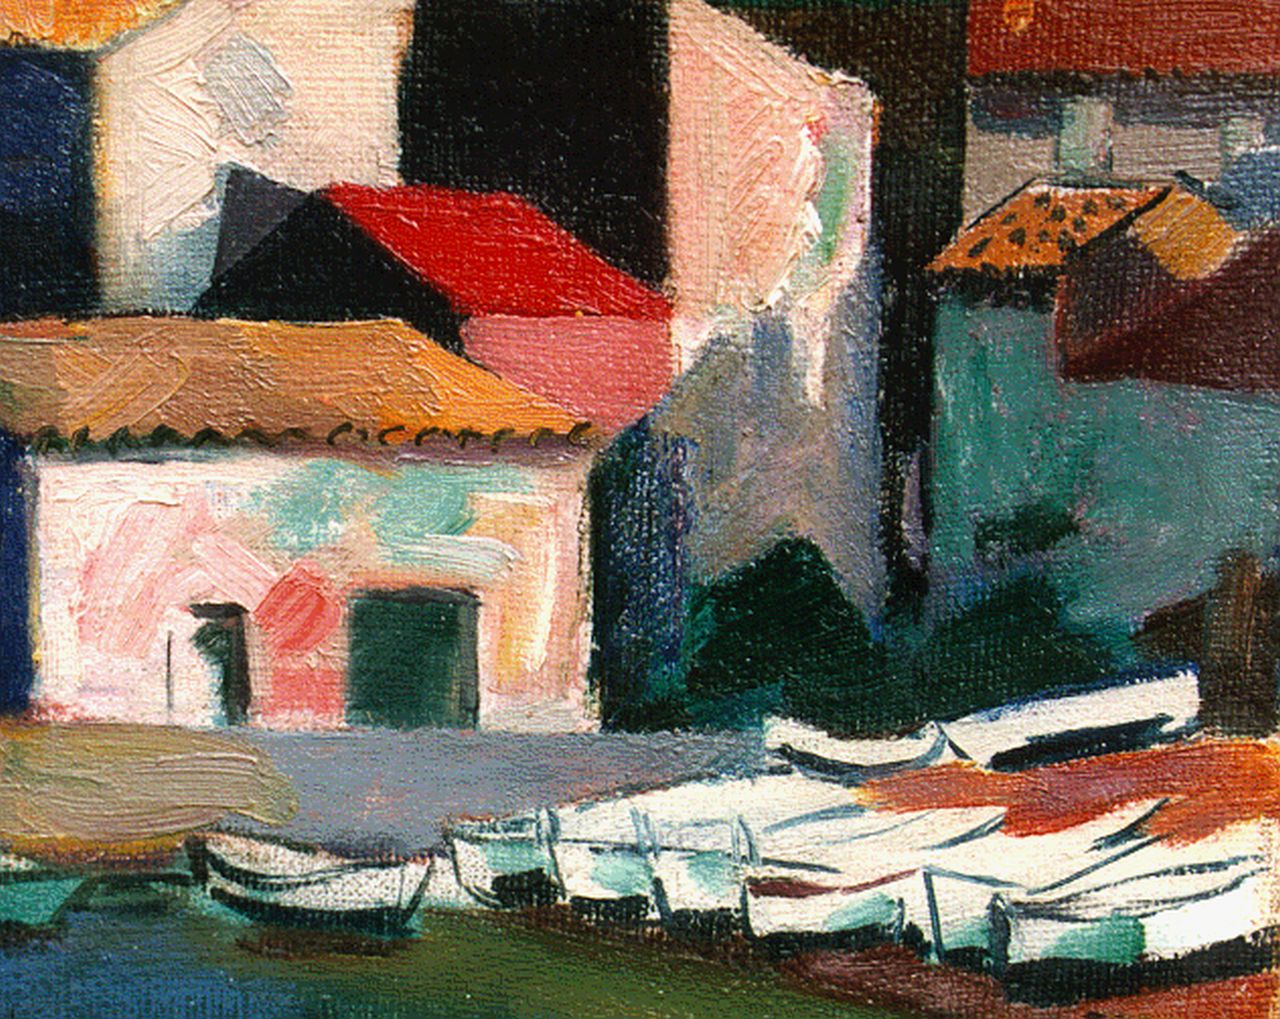 Oepts W.A.  | Willem Anthonie 'Wim' Oepts, Vieux port de St. Tropez, oil on canvas laid down on painter's board 12.4 x 14.3 cm, signed l.r. and painted ca. 1947